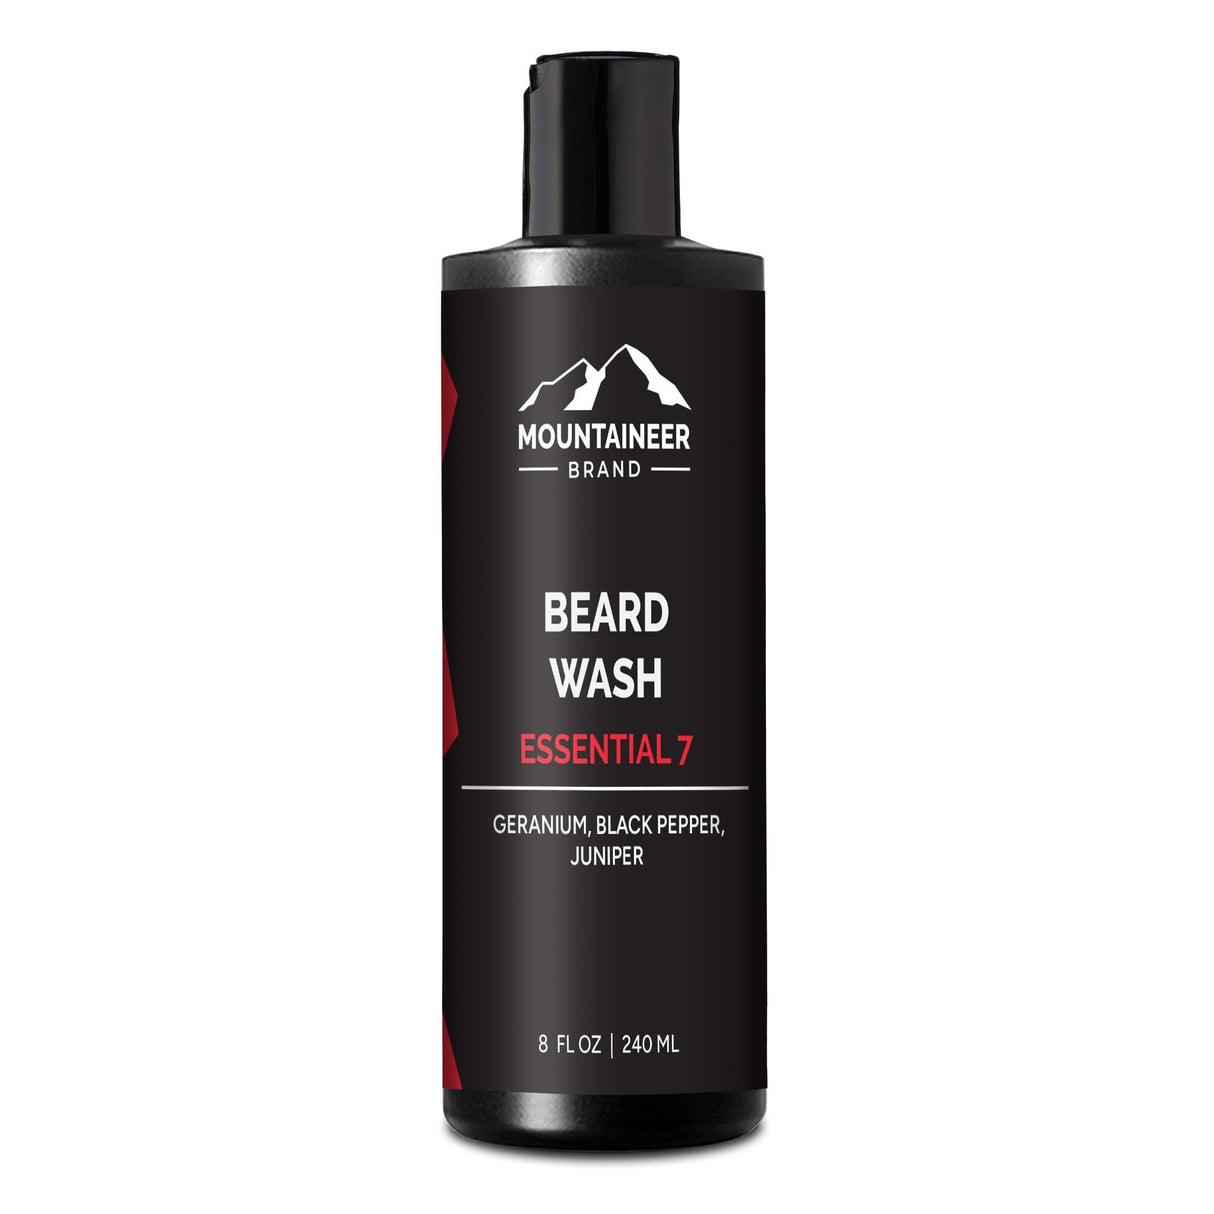 An Essential 7 Beard Wash by Mountaineer Brand Products on a white background.